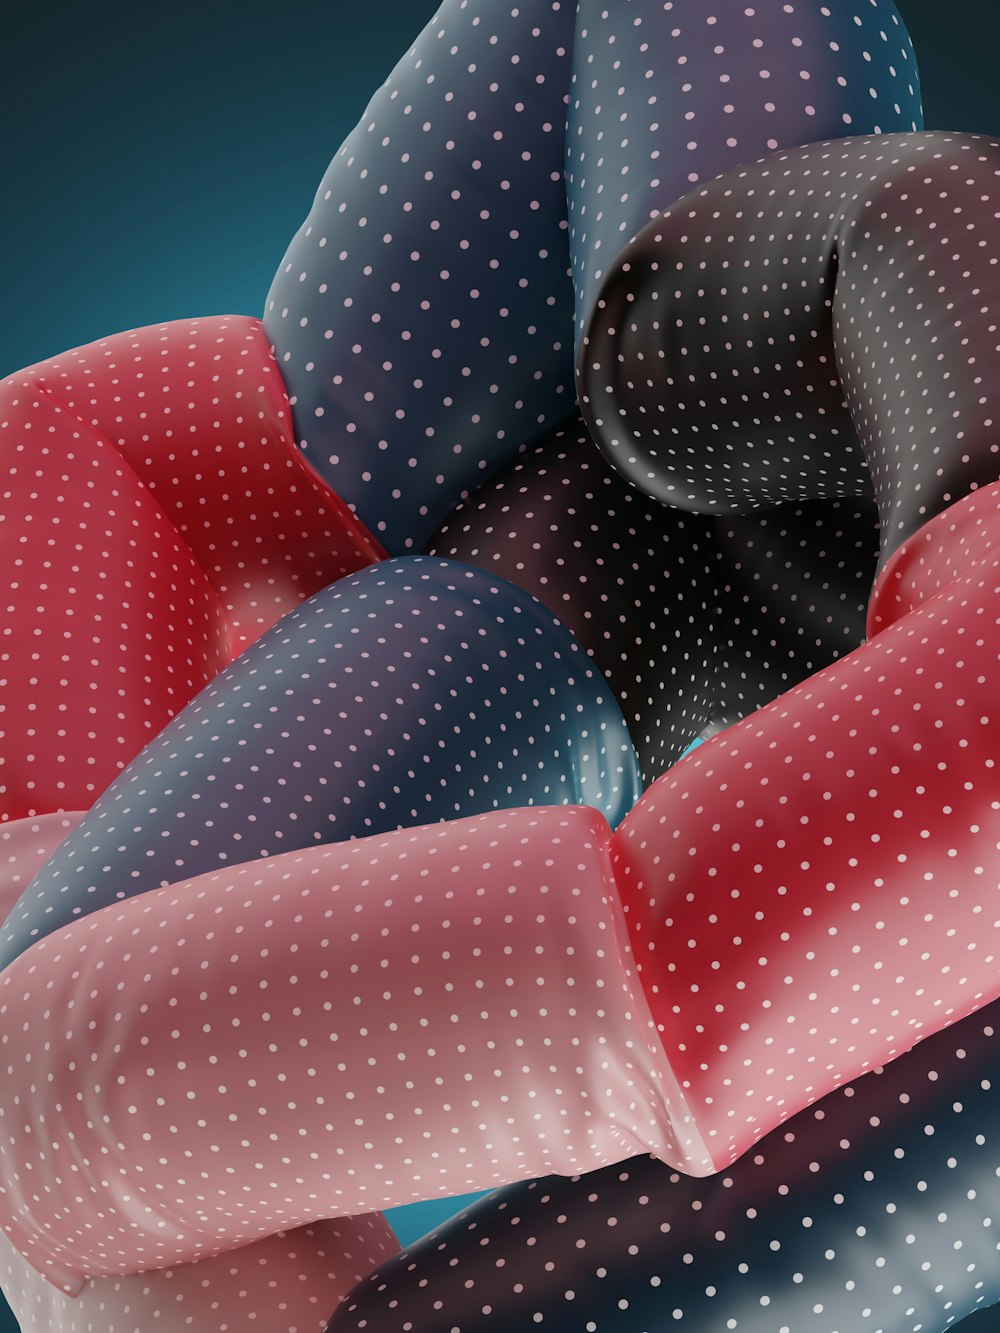 a group of pillows with polka dots on them